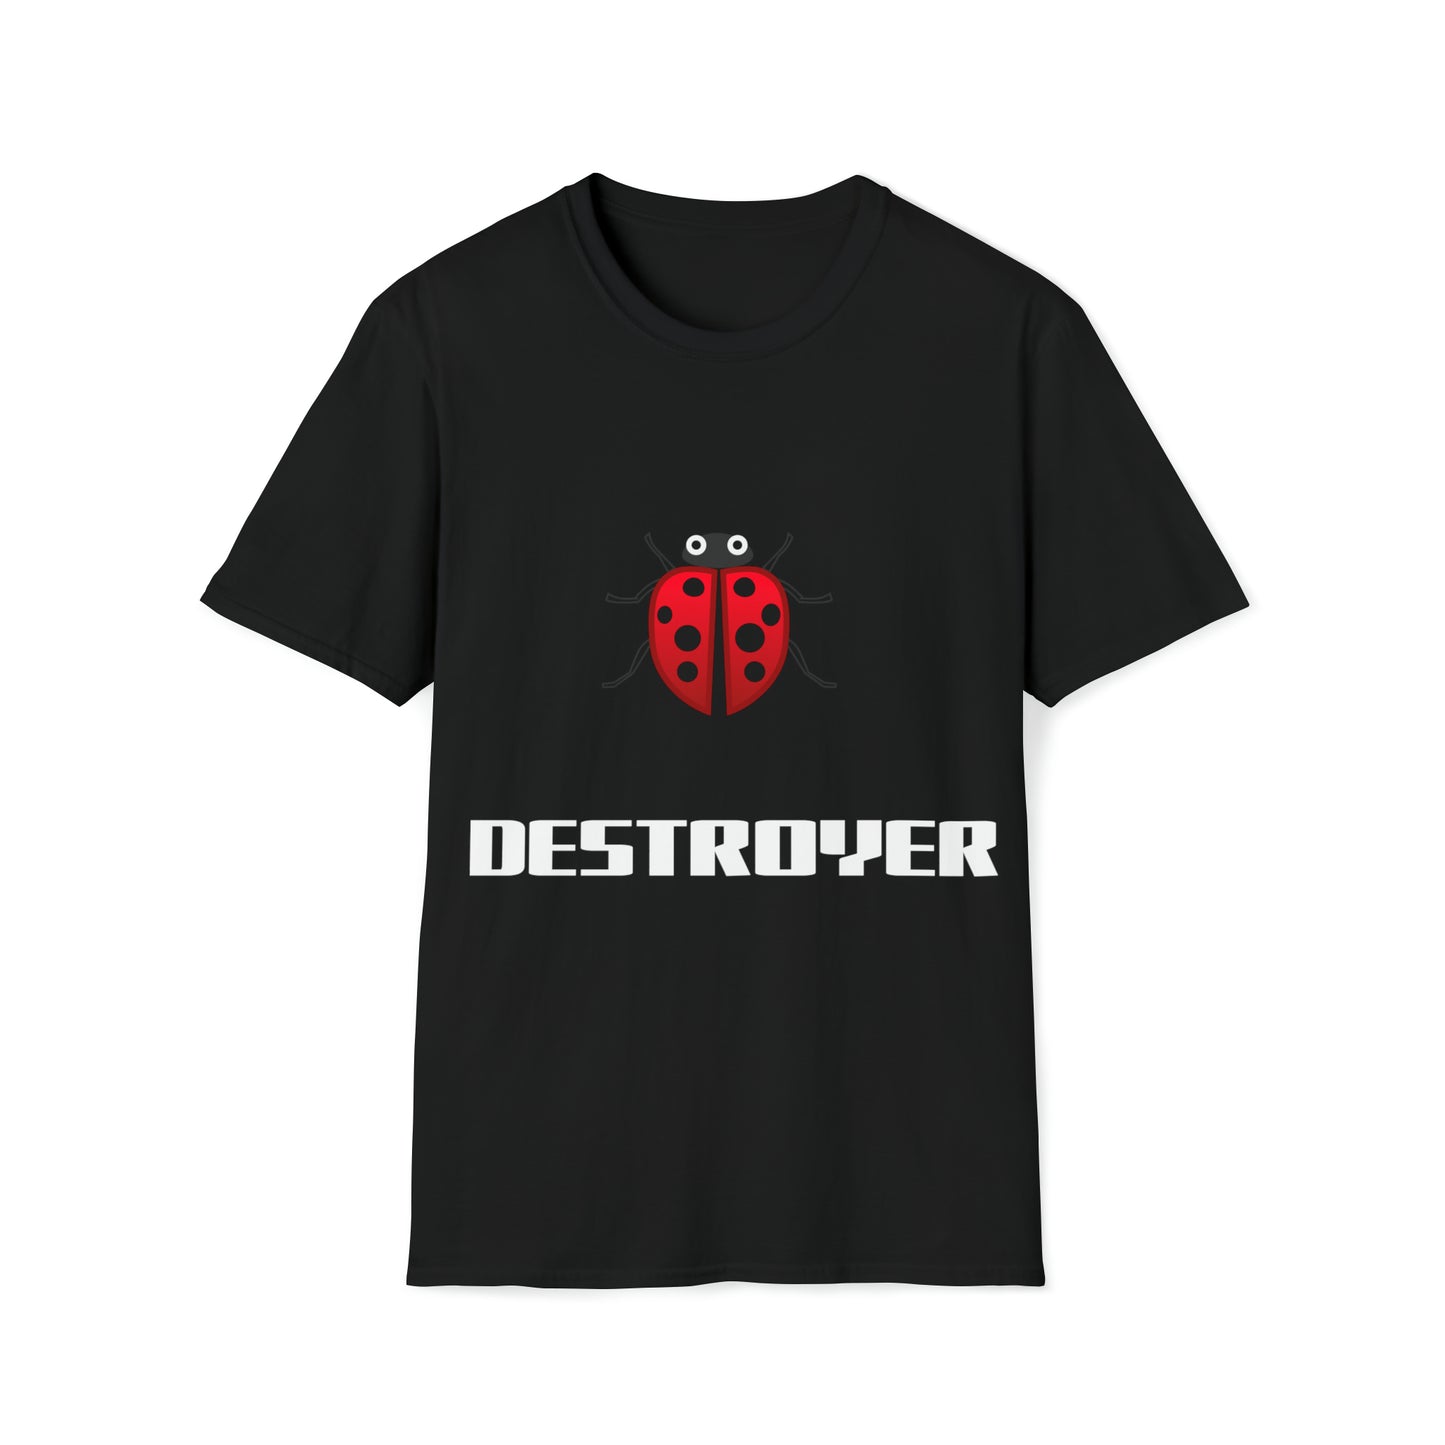 Destroyer and beetle tshirt